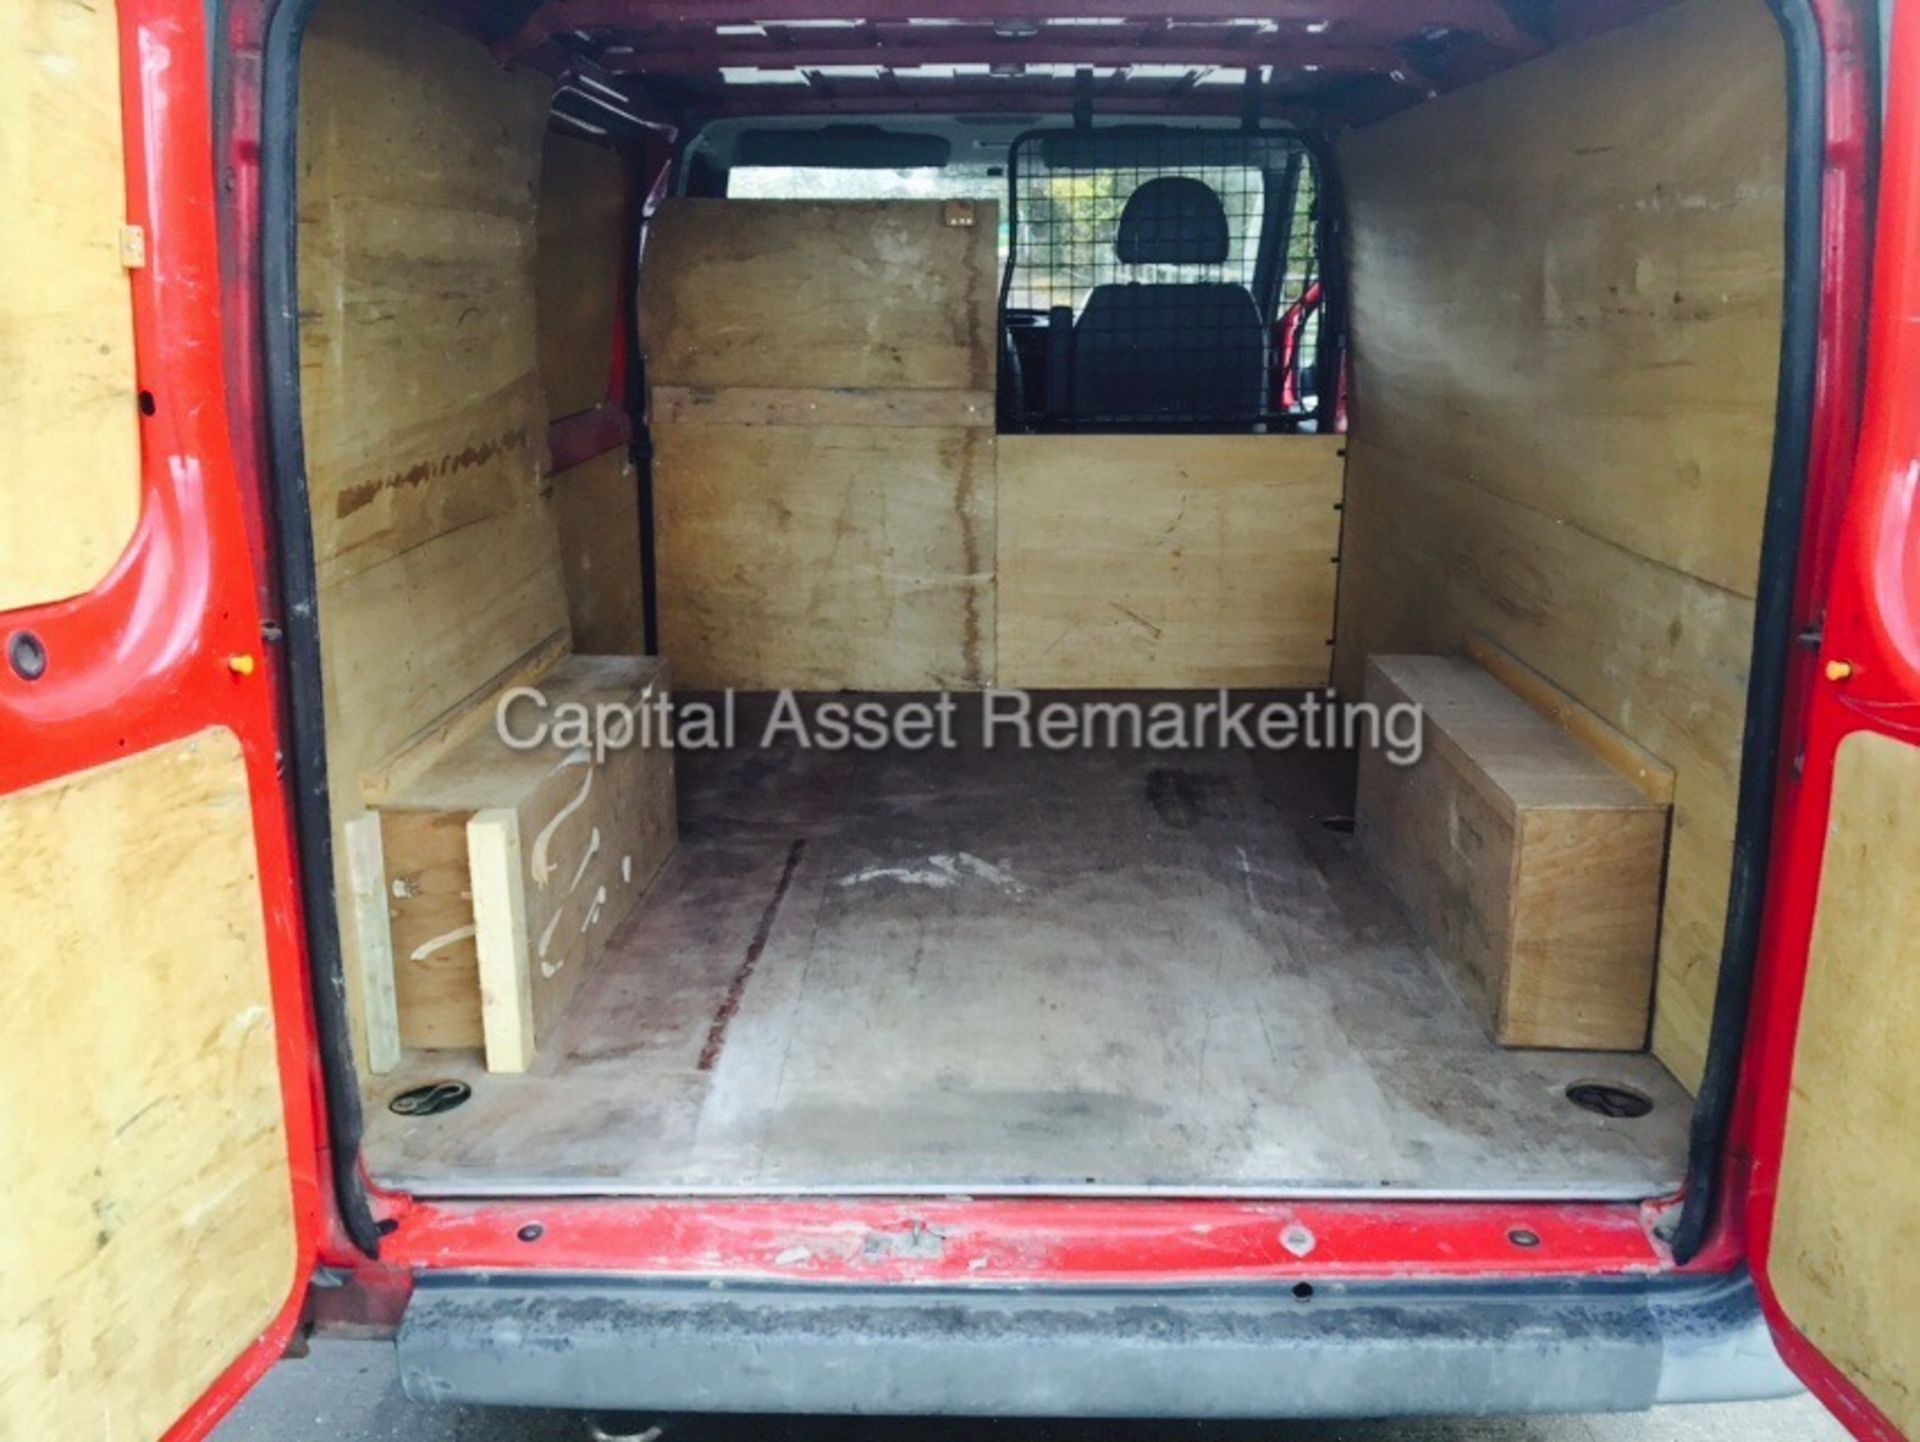 FORD TRANSIT 100 T300 (2004 - 04 REG) 2.0 DIESEL '100 PS'  (ULTRA LOW MILES)
NO VAT TO (SAVE 20%) - Image 10 of 10